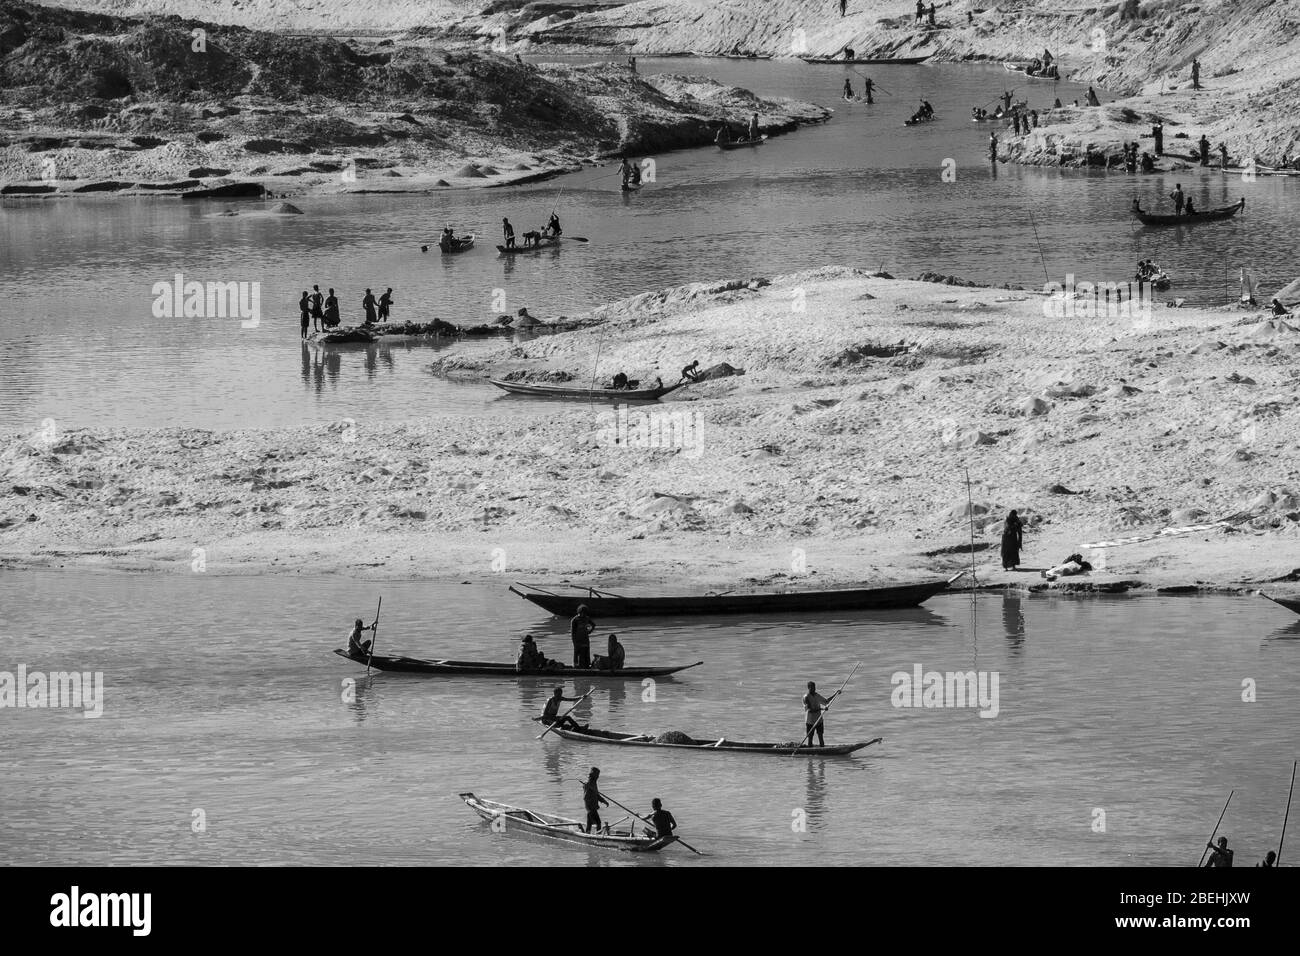 Workers with Boats For Digging Out Gravel from the Goyain River in Jaflong, at the border with India. The gravel will be sieved to make concrete. Stock Photo